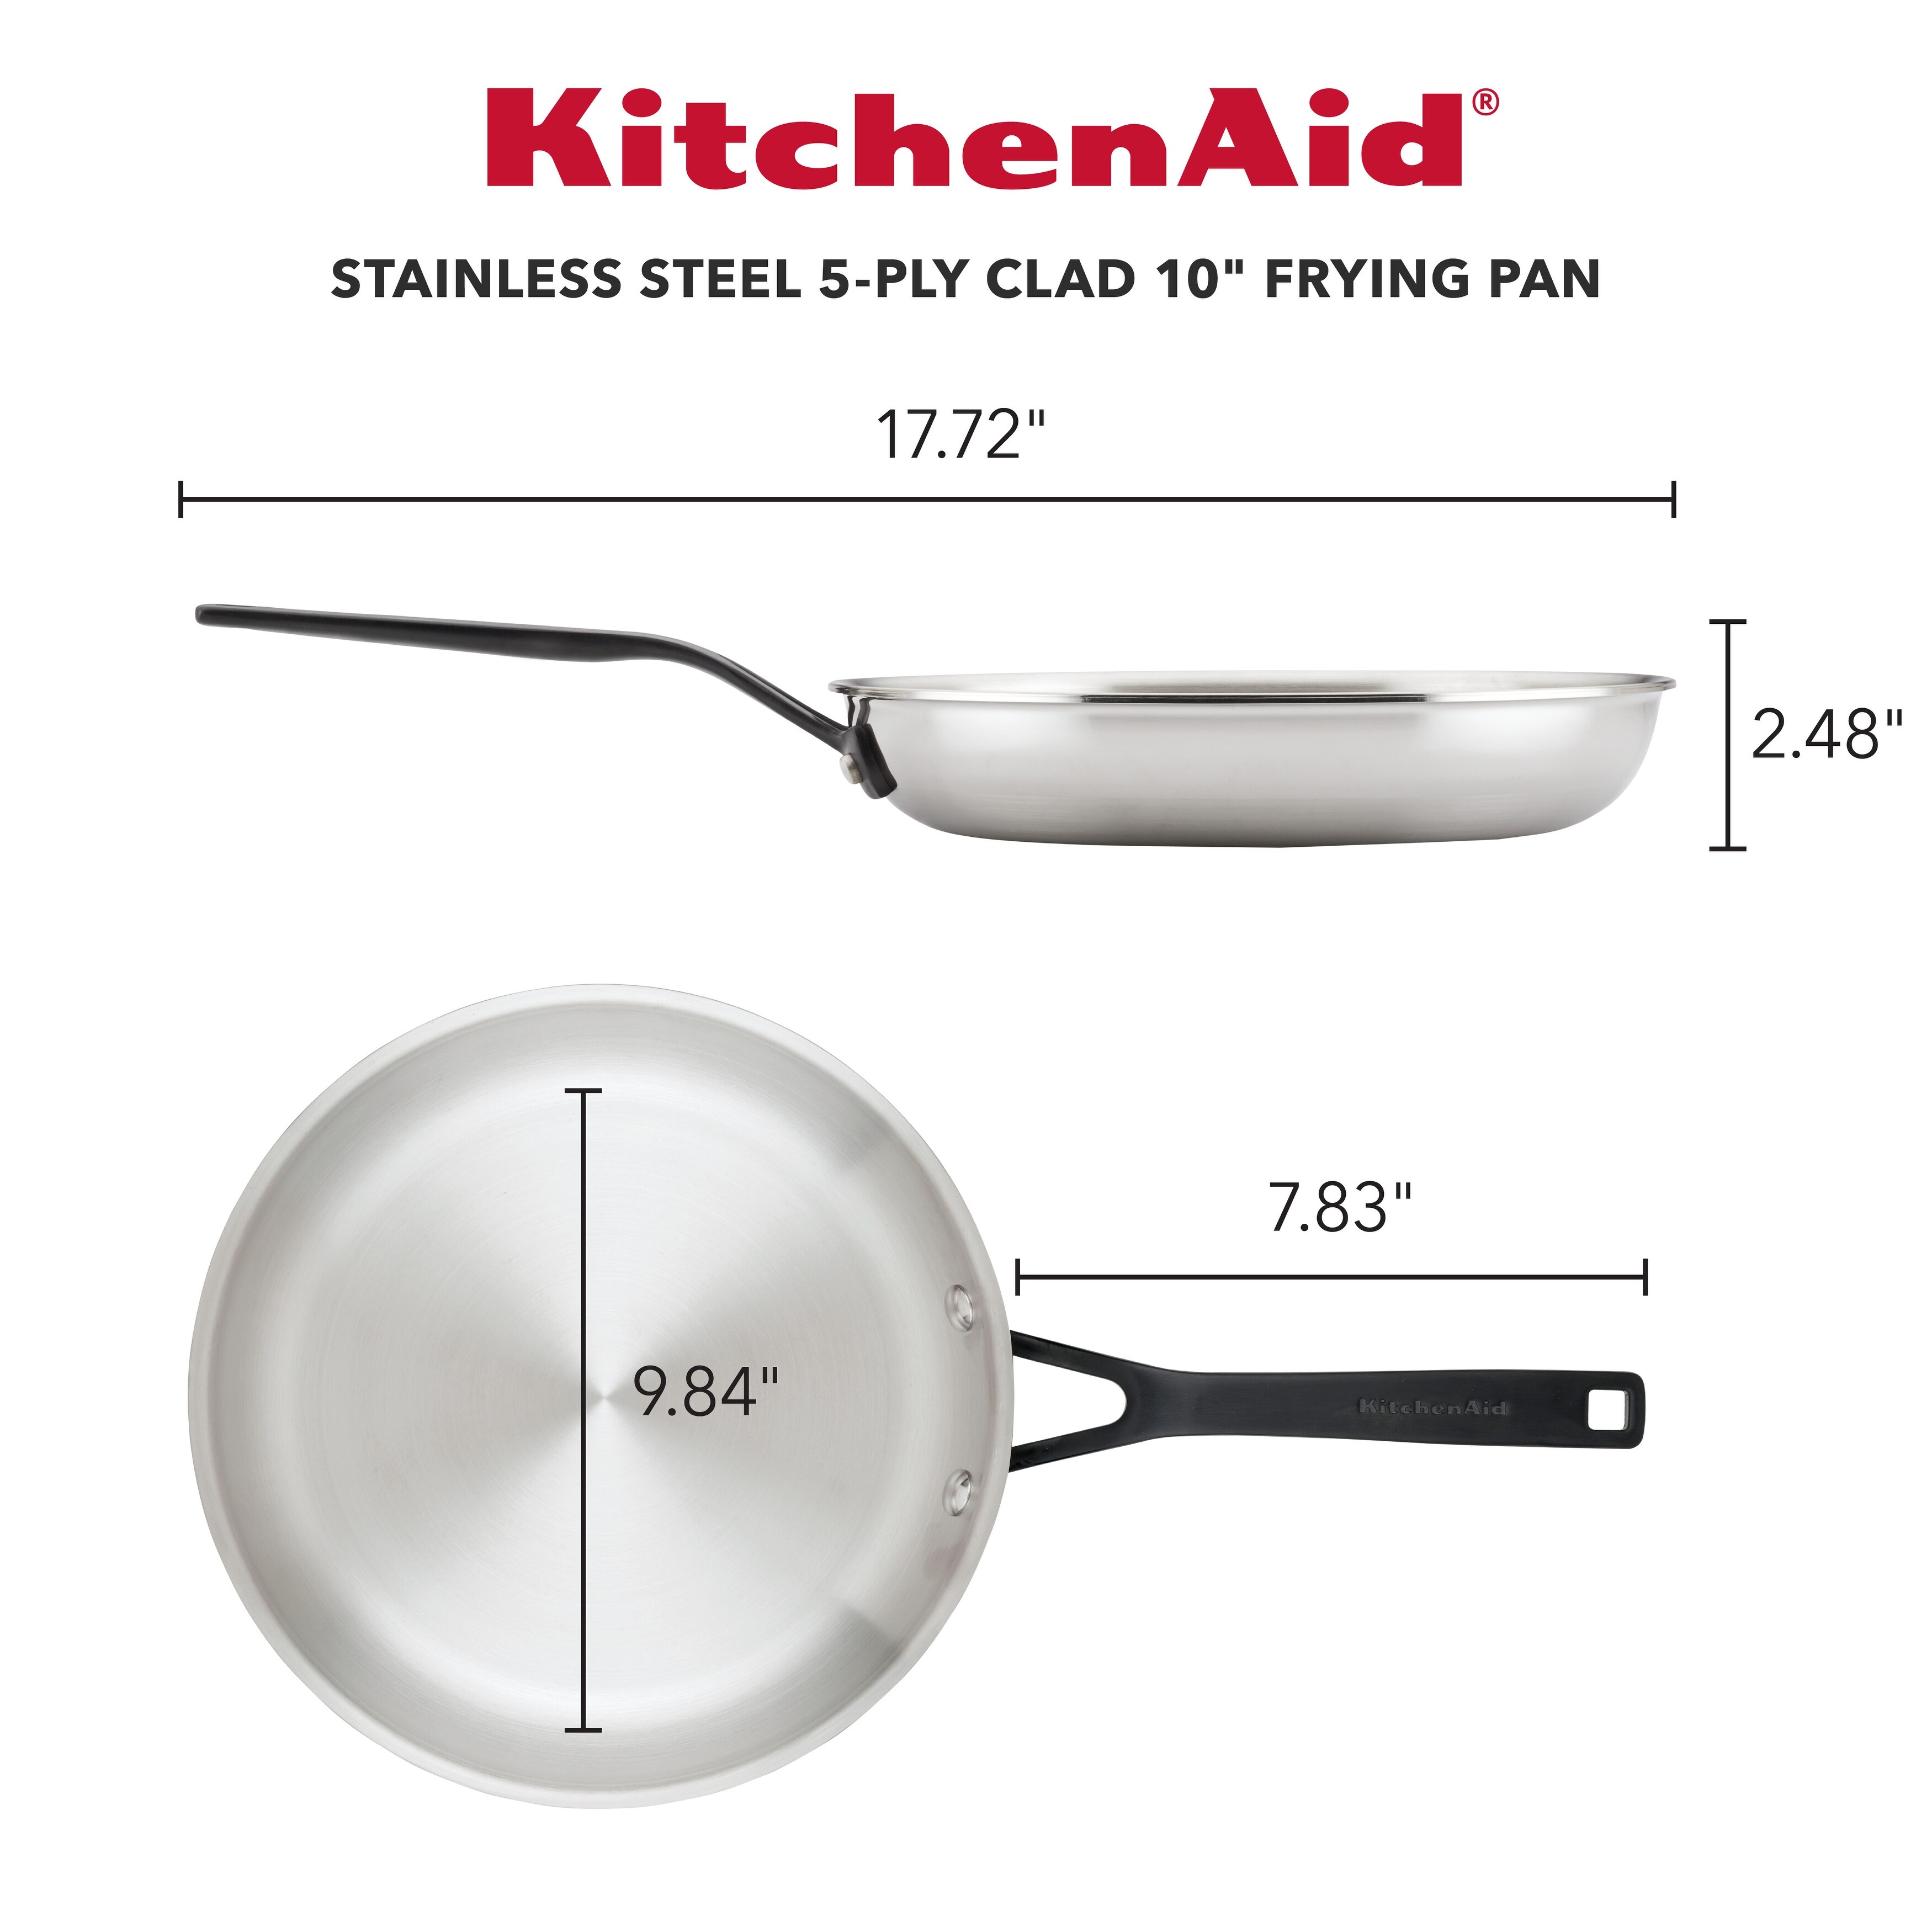 https://ak1.ostkcdn.com/images/products/is/images/direct/7eac037c04a168237afd3eaca8548a0b89e59ee1/KitchenAid-5-Ply-Clad-Stainless-Steel-Induction-Frying-Pan%2C-10-Inch%2C-Polished-Stainless-Steel.jpg